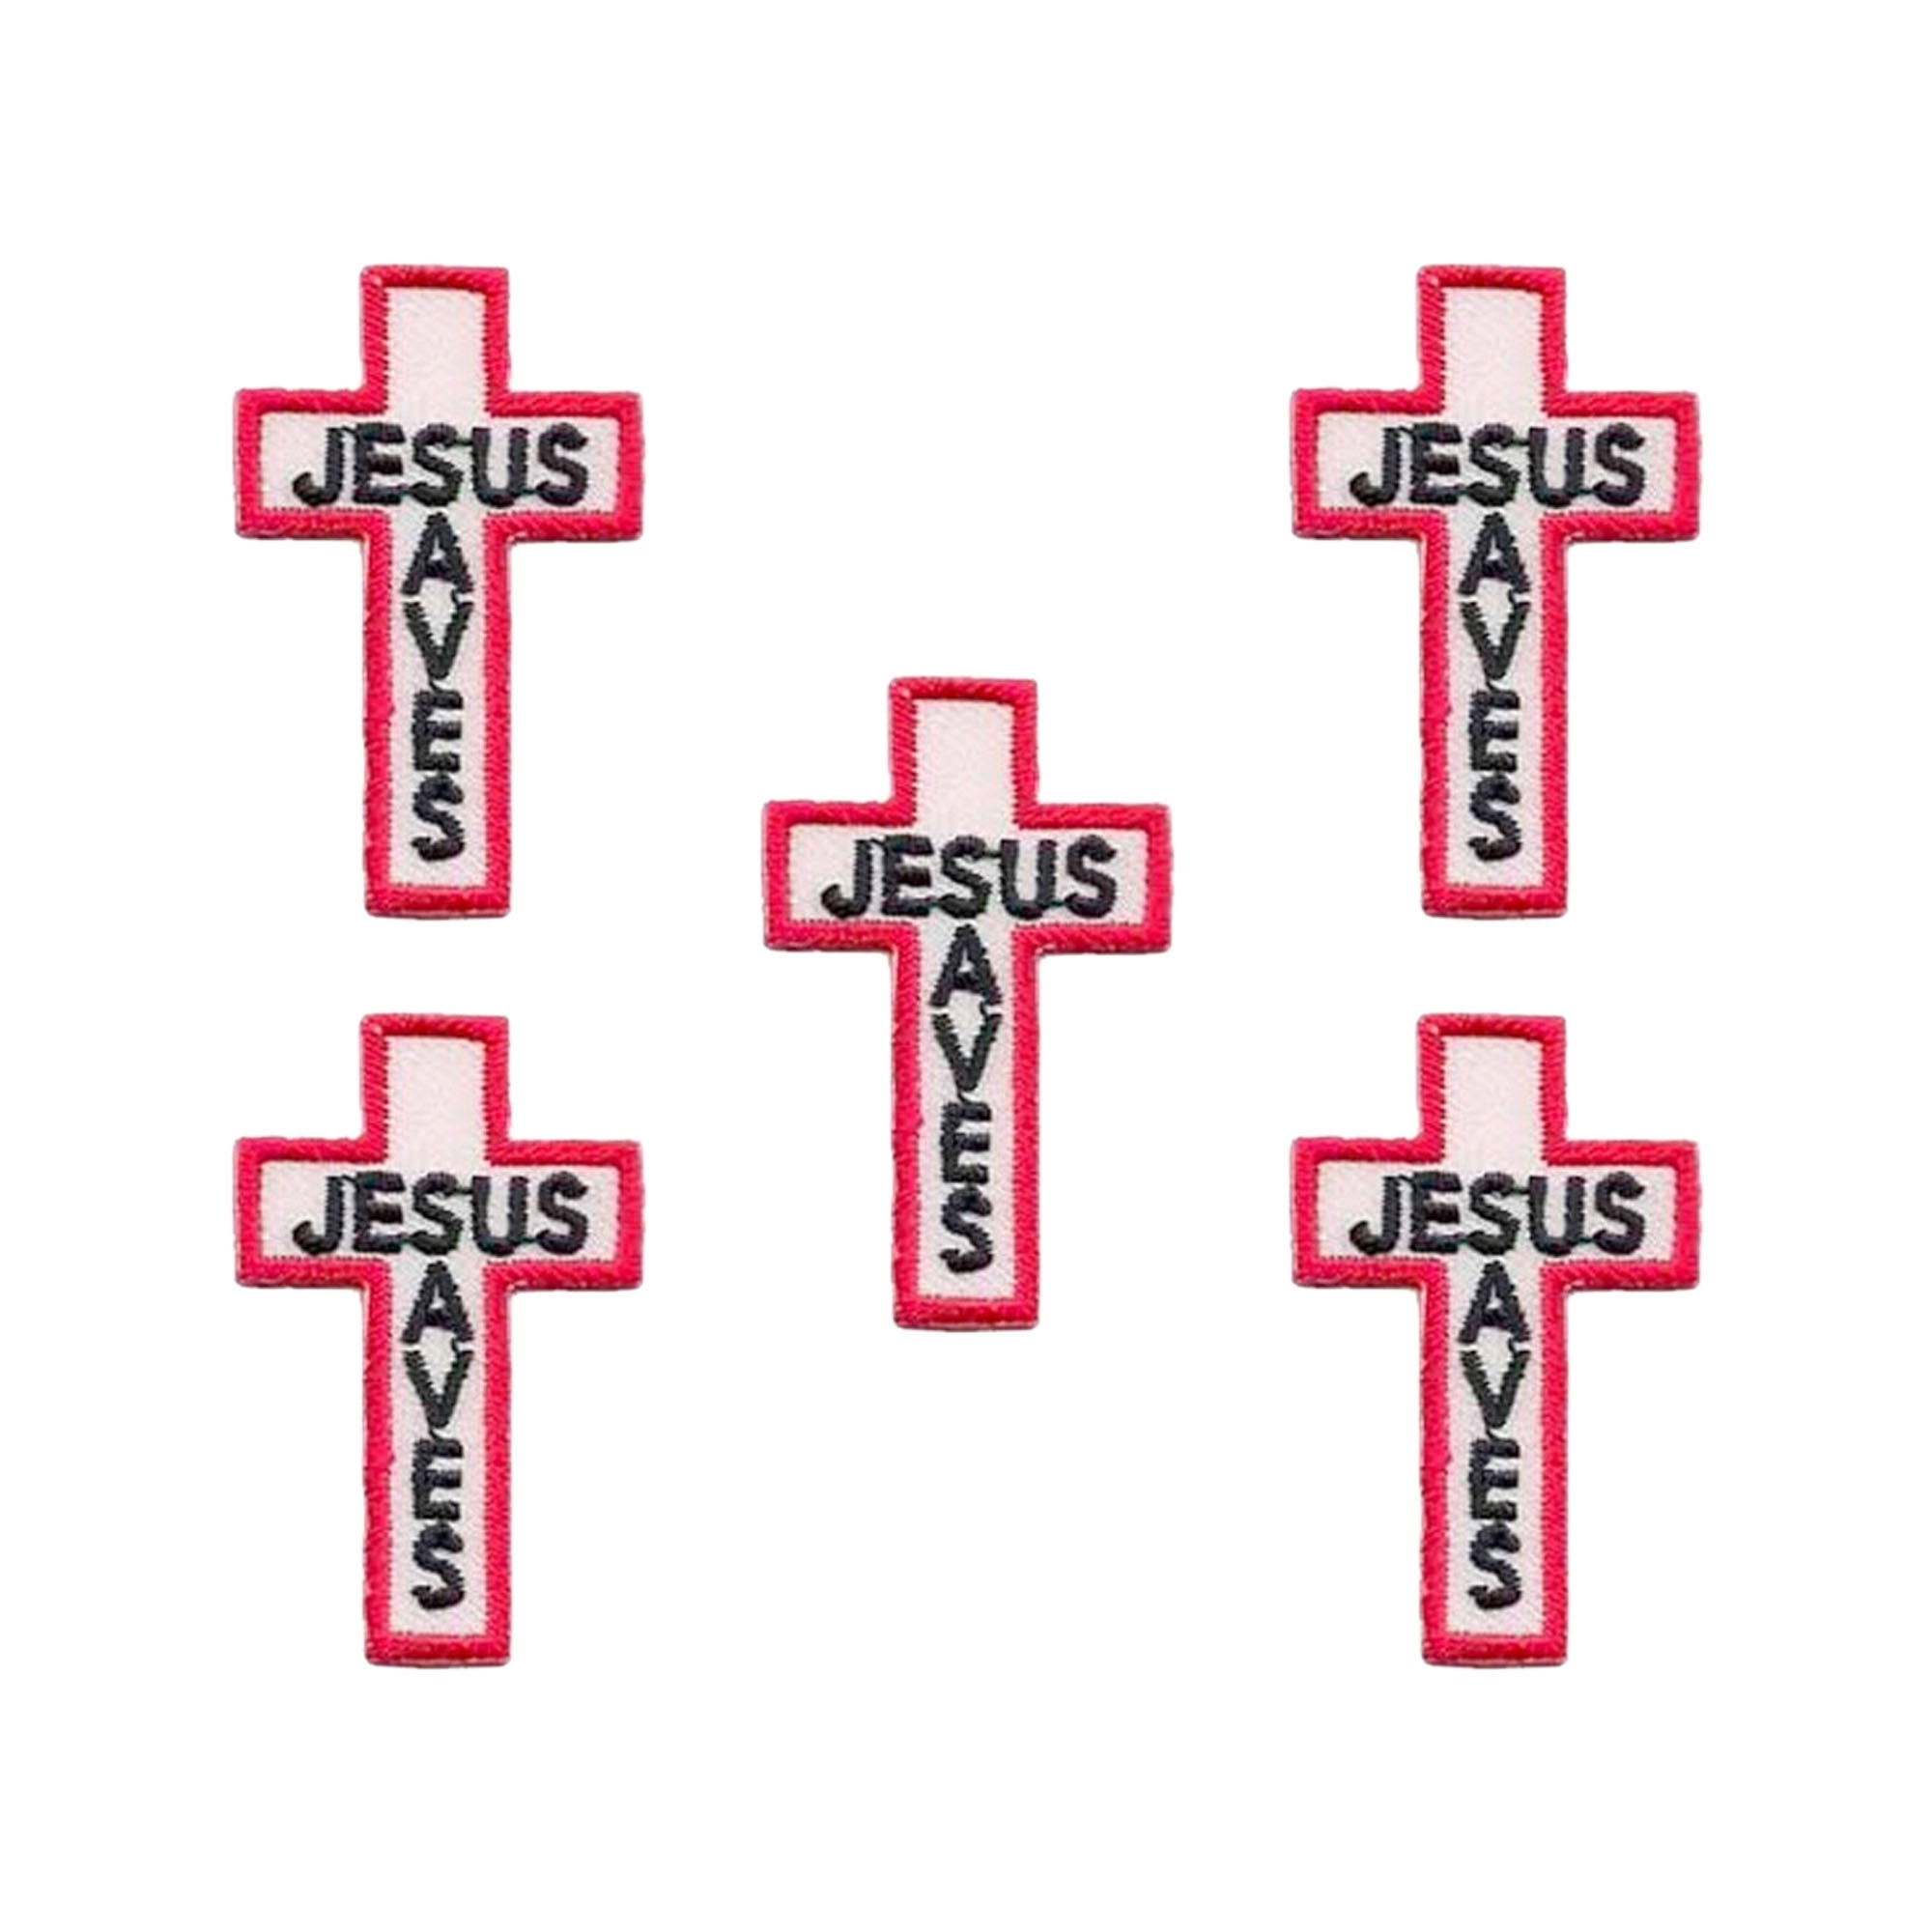 Jesus Saves Cross Patches (5 Pack) Religious Embroidered Iron On Patch  Applique - Helia Beer Co